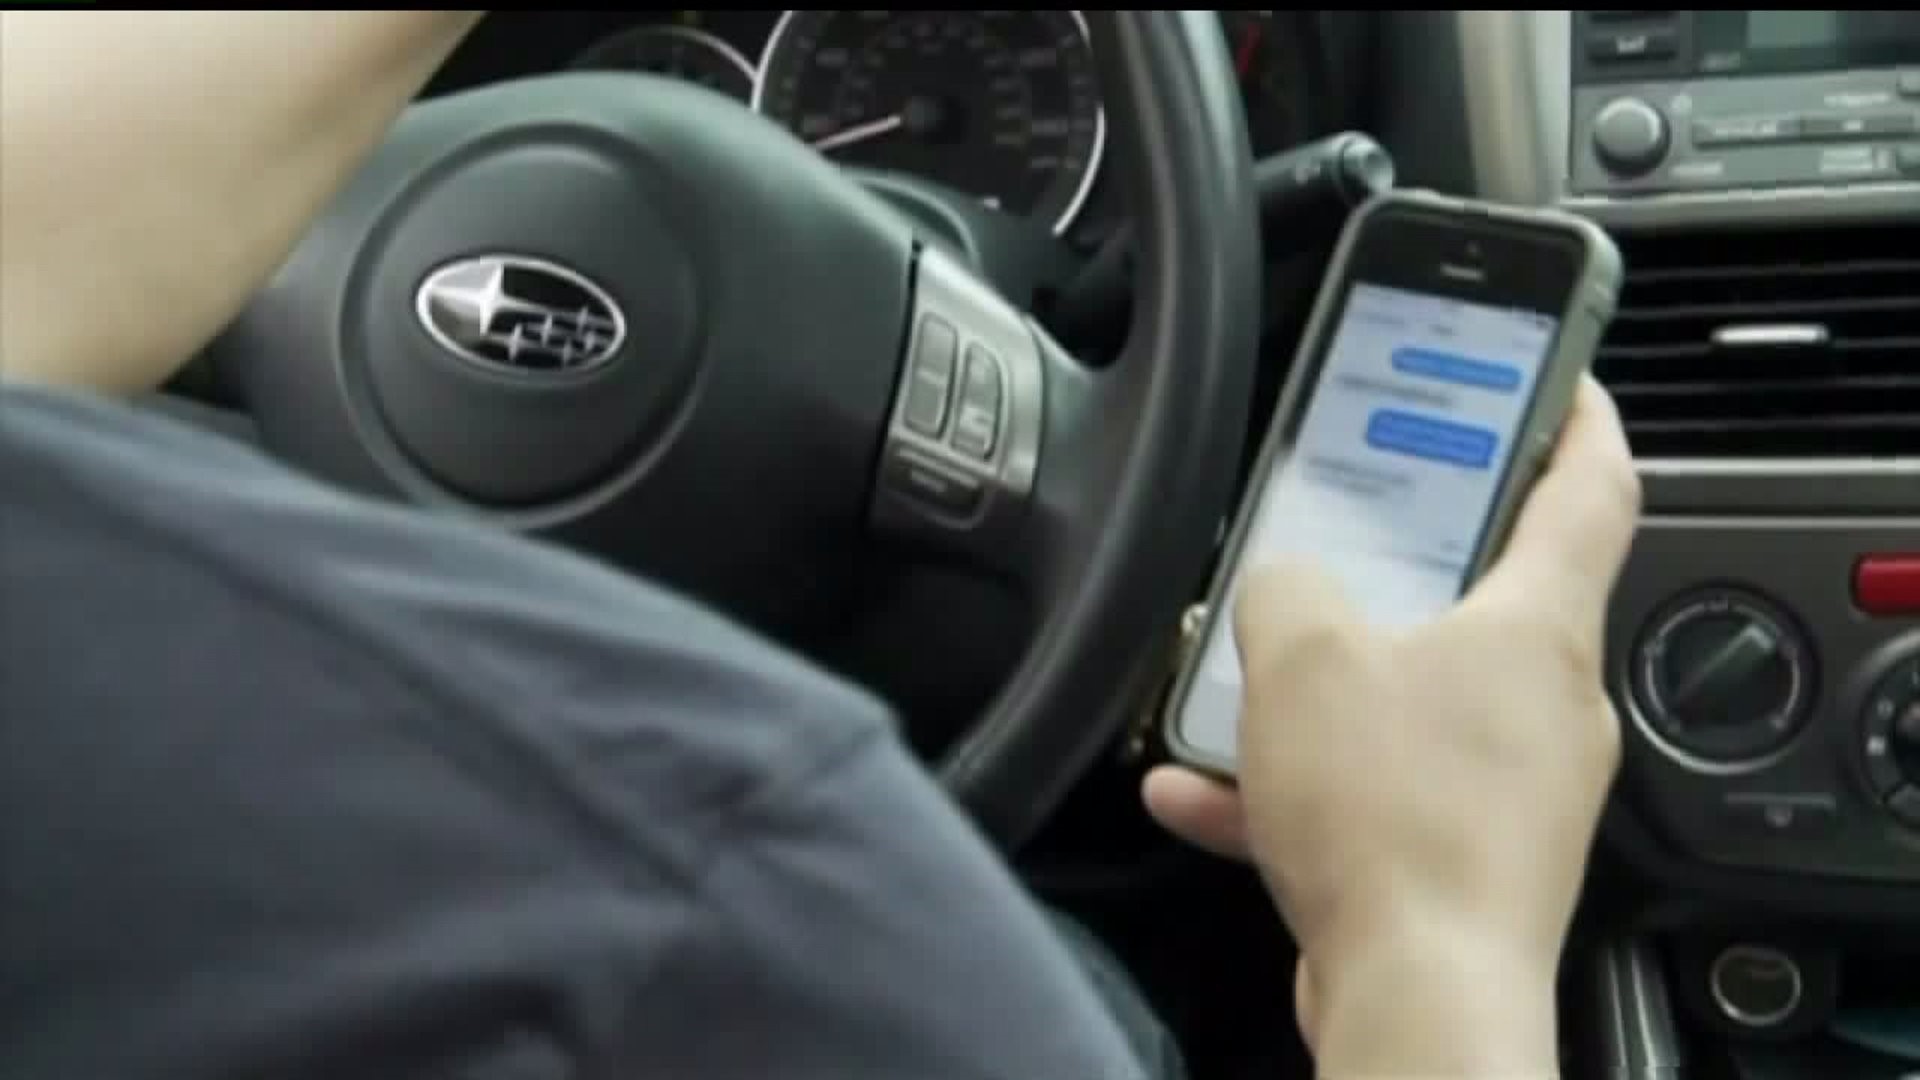 Bill proposes "Hand-Held Ban" to combat distracted driving